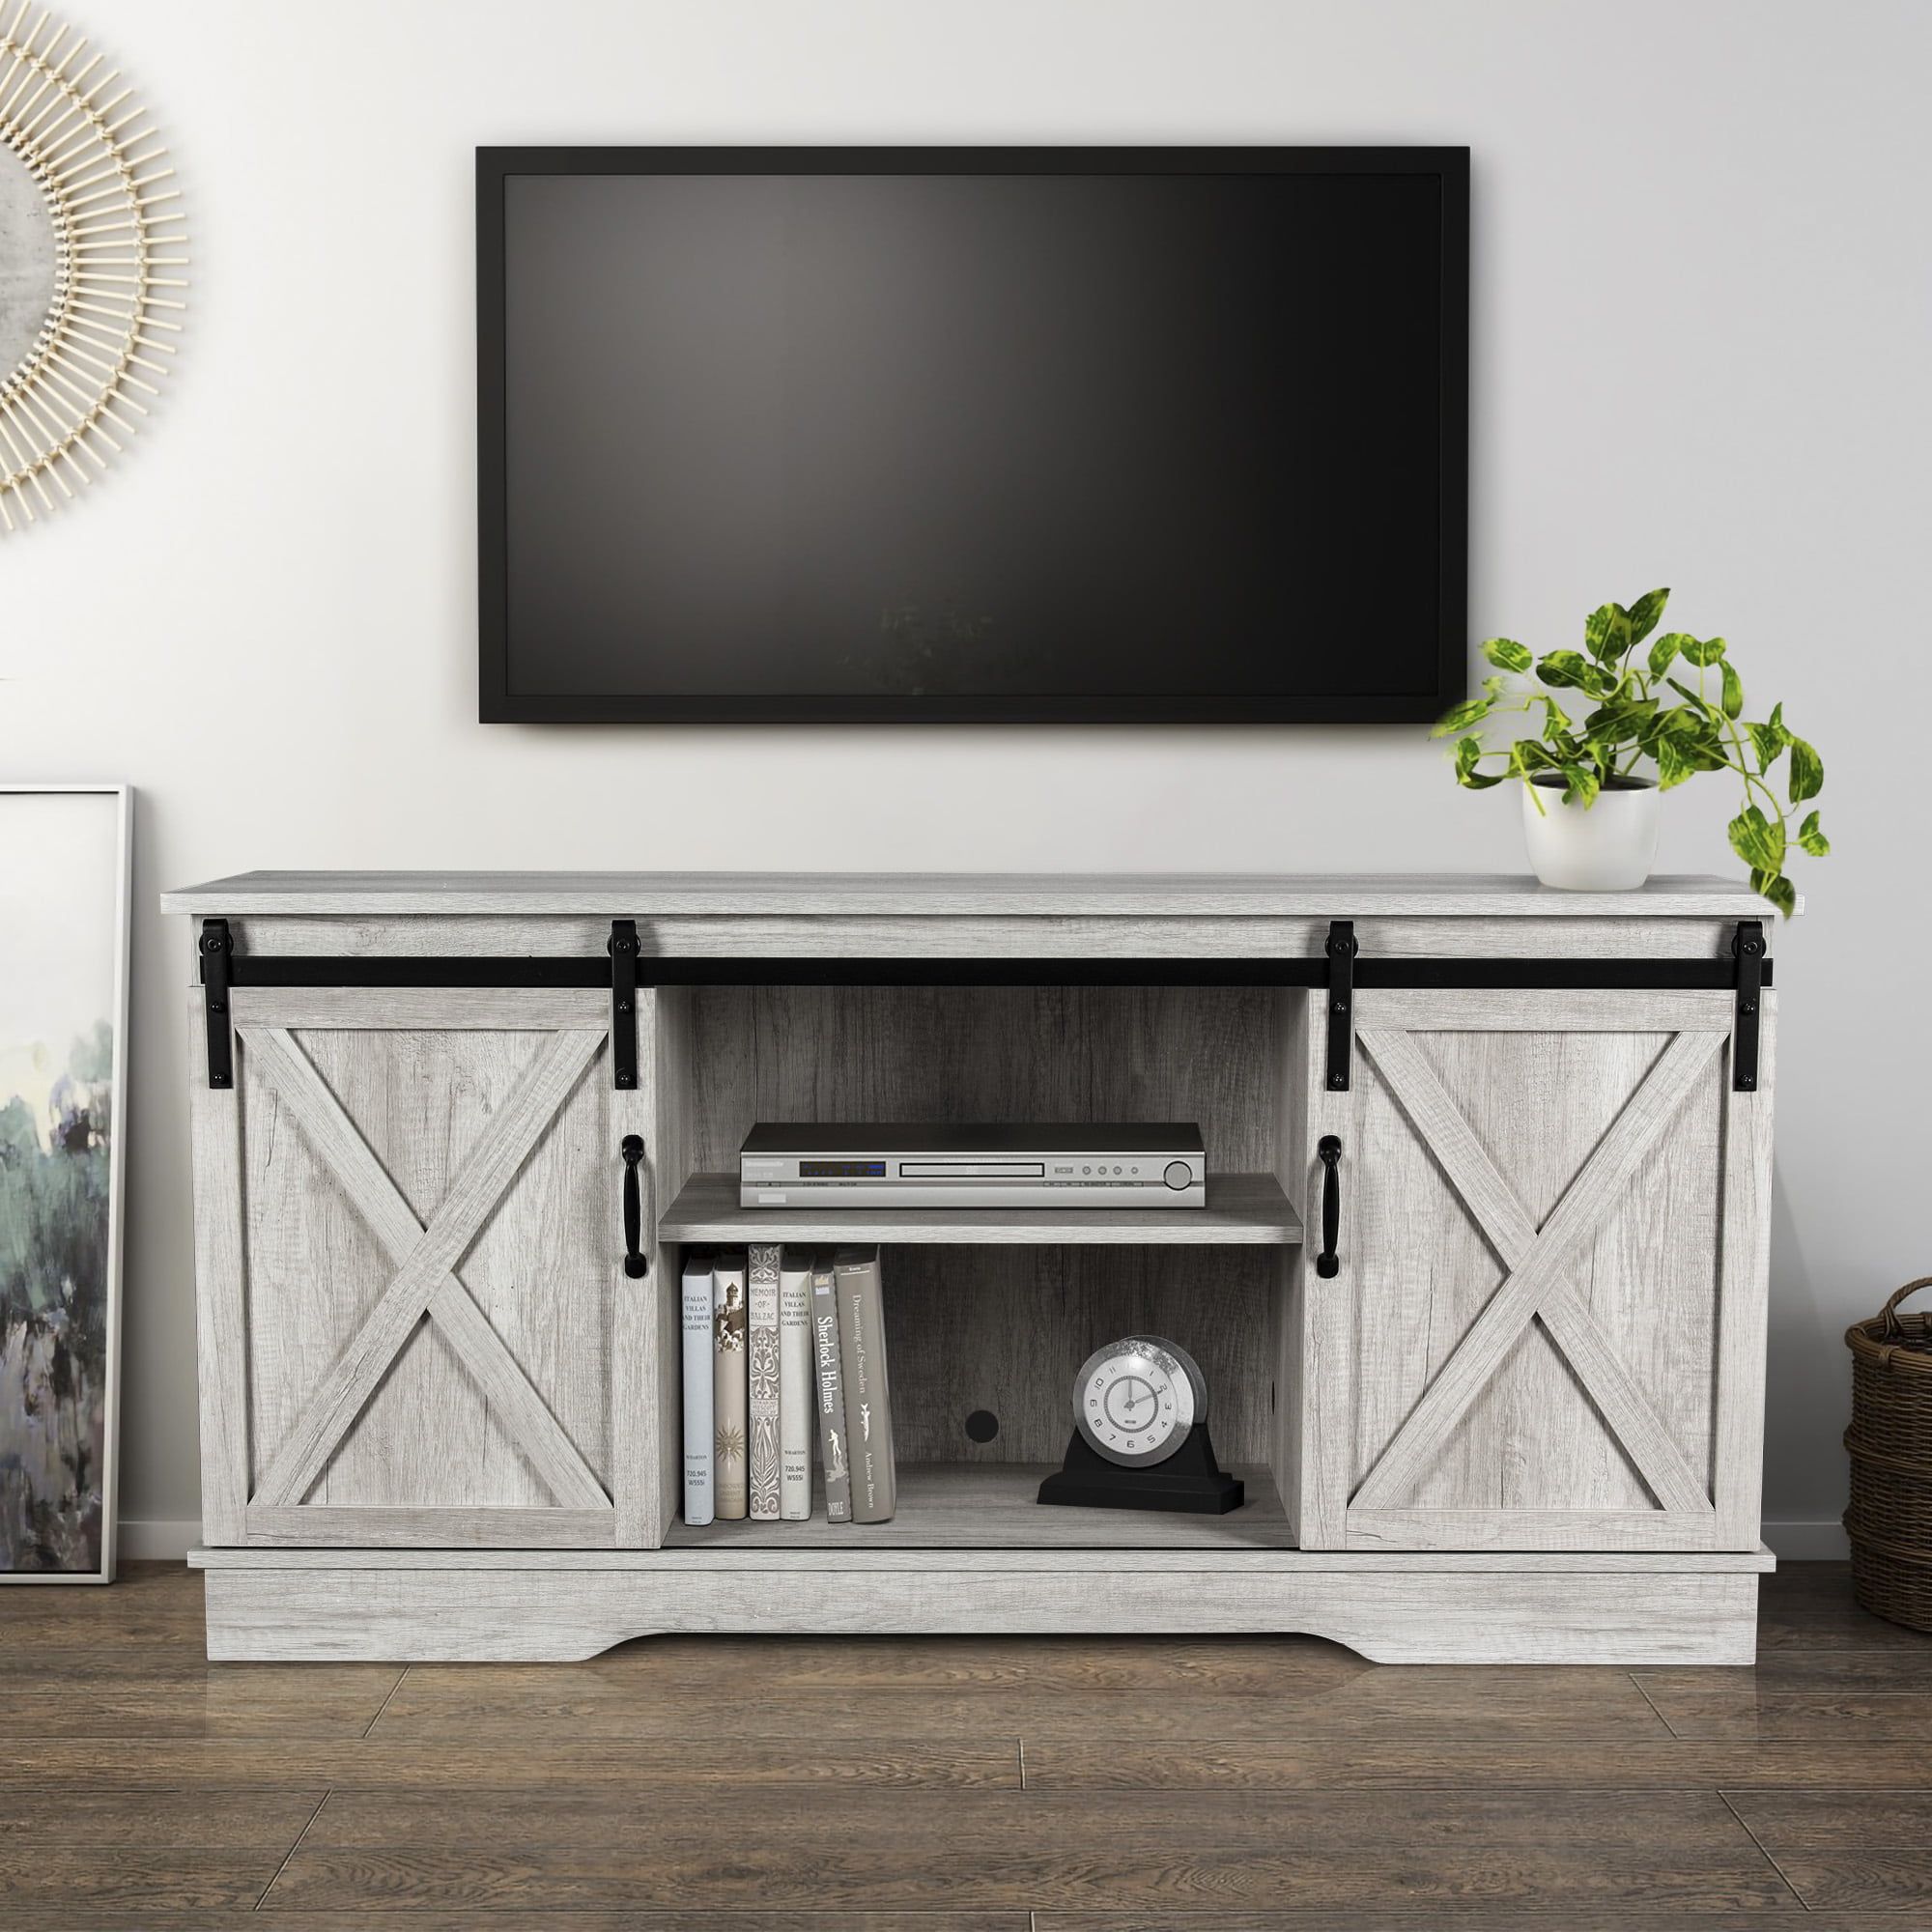 Belleze Modern Farmhouse Style 58 Inch Tv Stand With Sliding Barn Door Within Modern Farmhouse Barn Tv Stands (View 13 of 20)